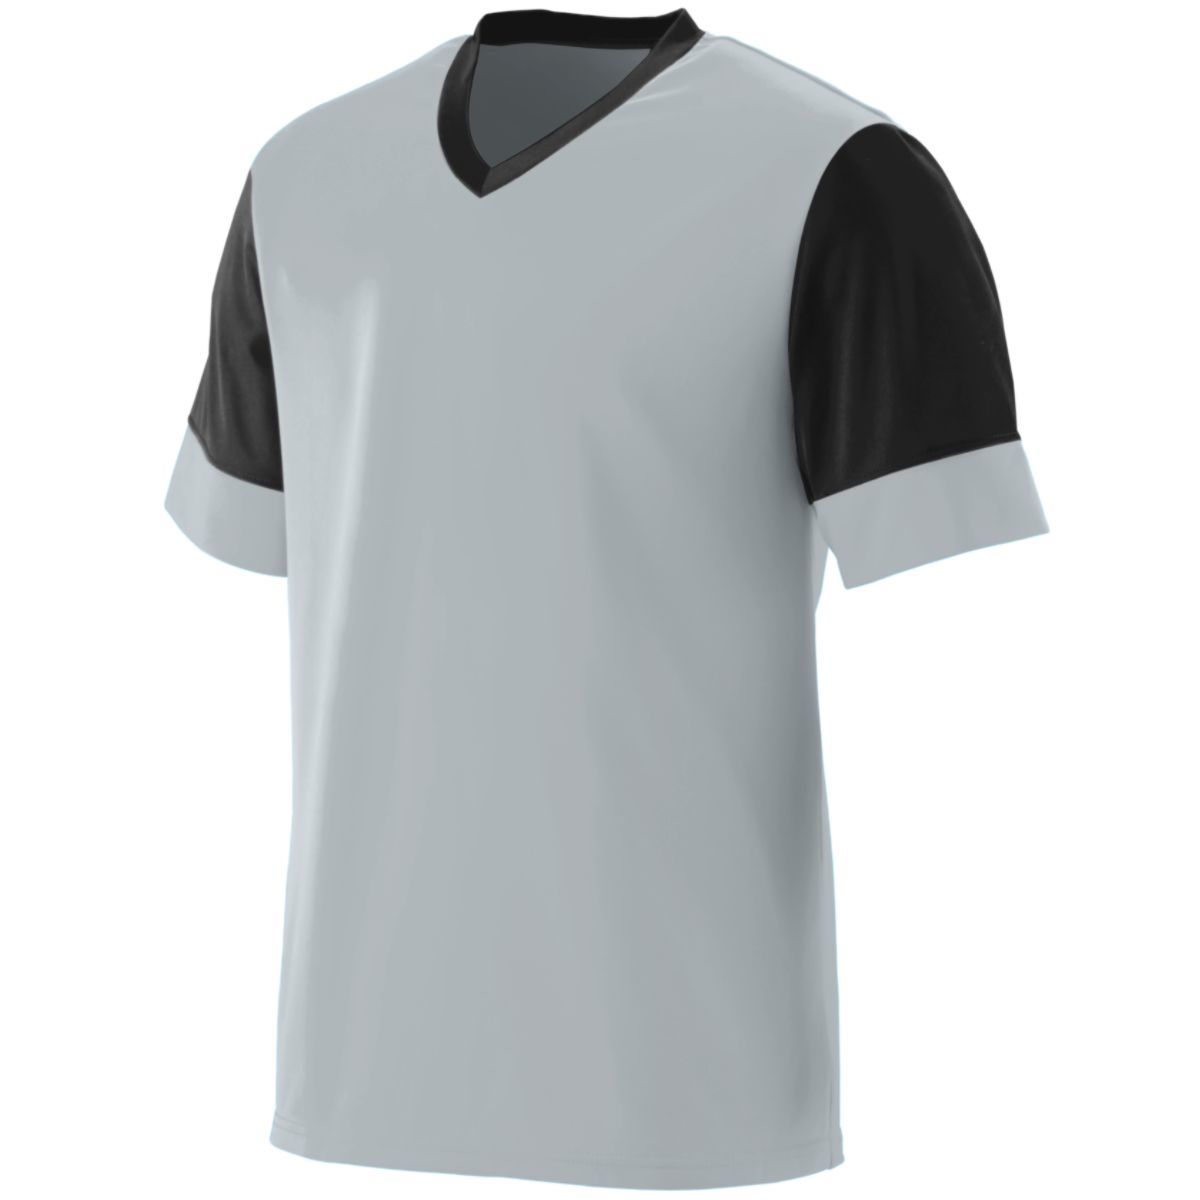 Augusta Sportswear Youth Lightning Jersey in Silver/Black  -Part of the Youth, Youth-Jersey, Augusta-Products, Soccer, Shirts, All-Sports-1 product lines at KanaleyCreations.com